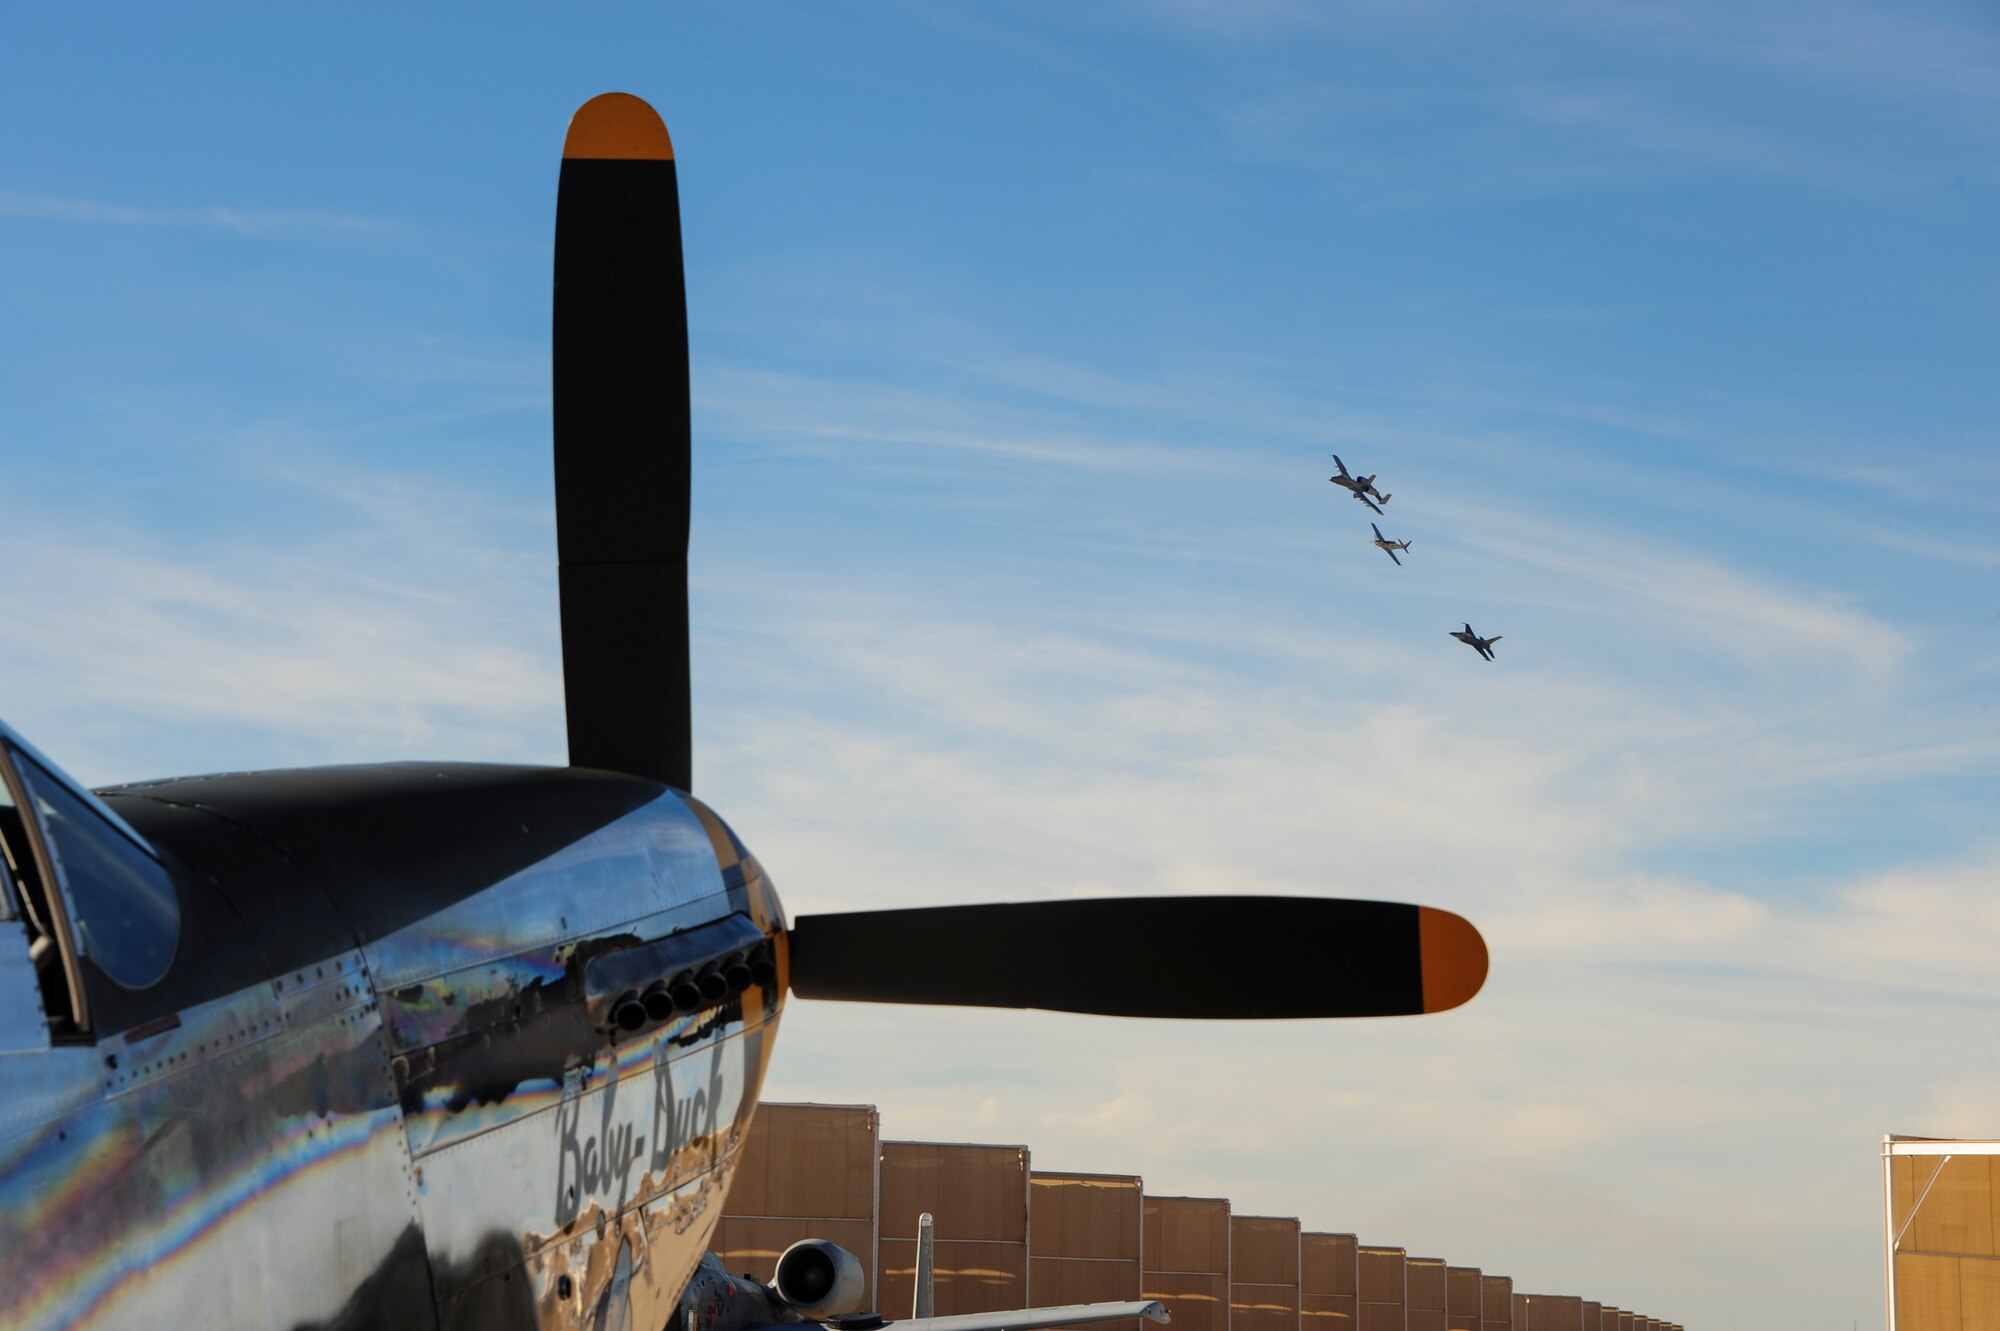 A formation of aircraft fly above a P-51 Mustang during the 2017 Heritage Flight Training and Certification Course at Davis-Monthan Air Force Base, Ariz., Feb. 10, 2017. The annual aerial demonstration training event has been held at D-M since 2001. The modern aircraft that participated in this year's HFTCC were the F-35 Lightning II, the F-22 Raptor, F-16 Fighting Falcon and the A-10C Thunderbolt II. The historic aircraft included the P-51 and T-51 Mustang, P-40 Warhawk, P-38 Lightning, P-47 Thunderbolt, T-33 Shooting Star and F-86 Sabre. (U.S. Air Force Photo by Airman 1st Class Nathan H. Barbour)